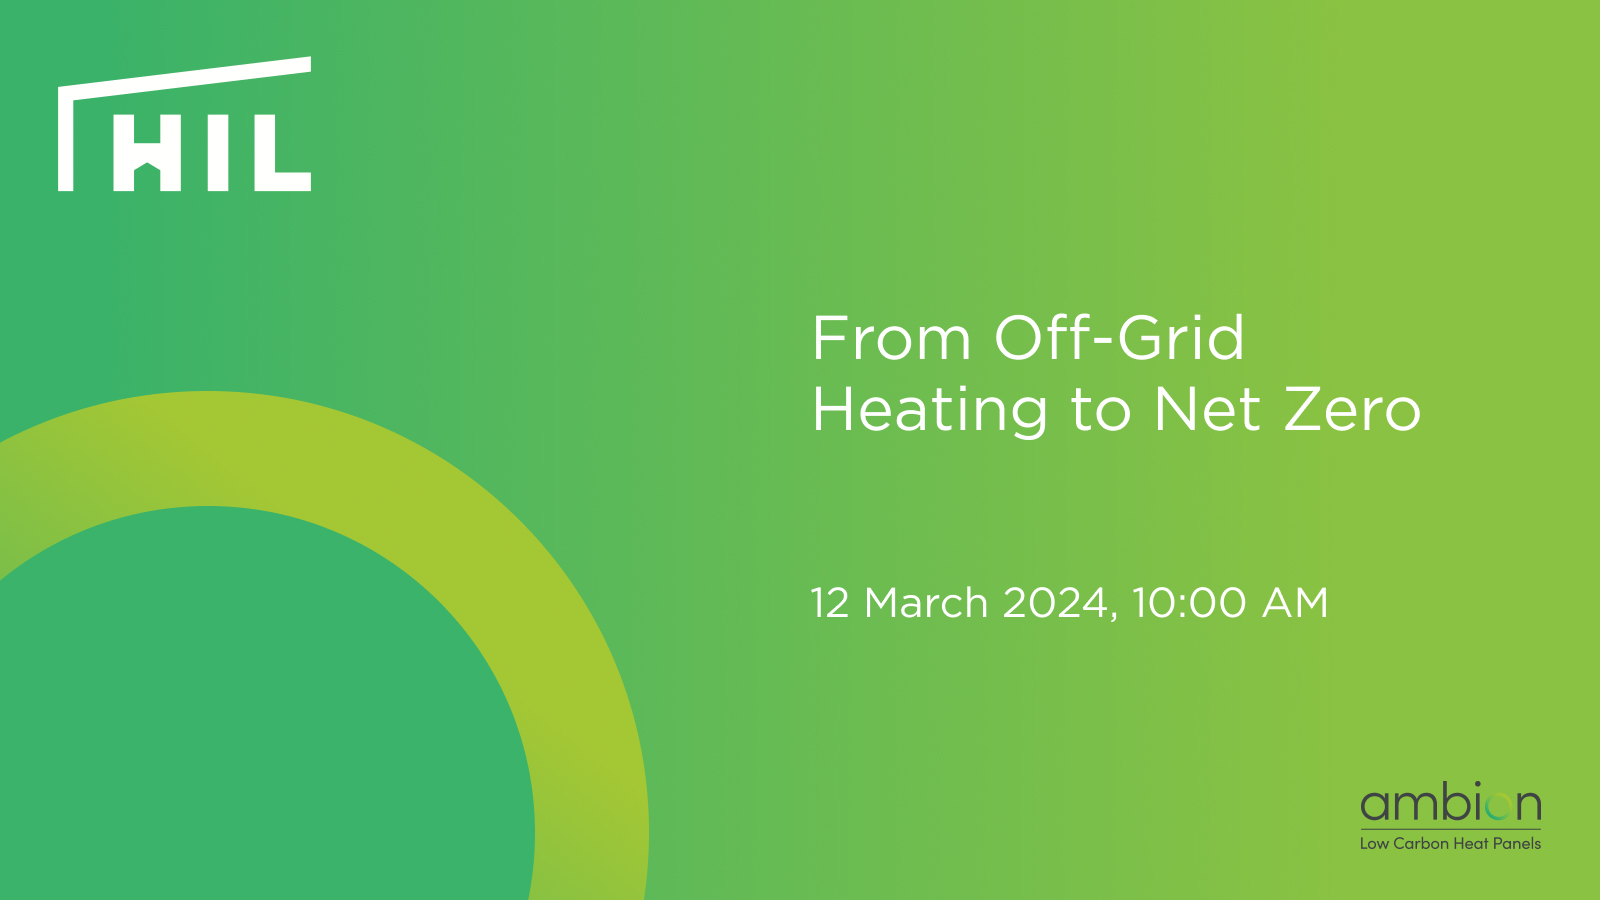 From Off-Grid Heating to Net Zero